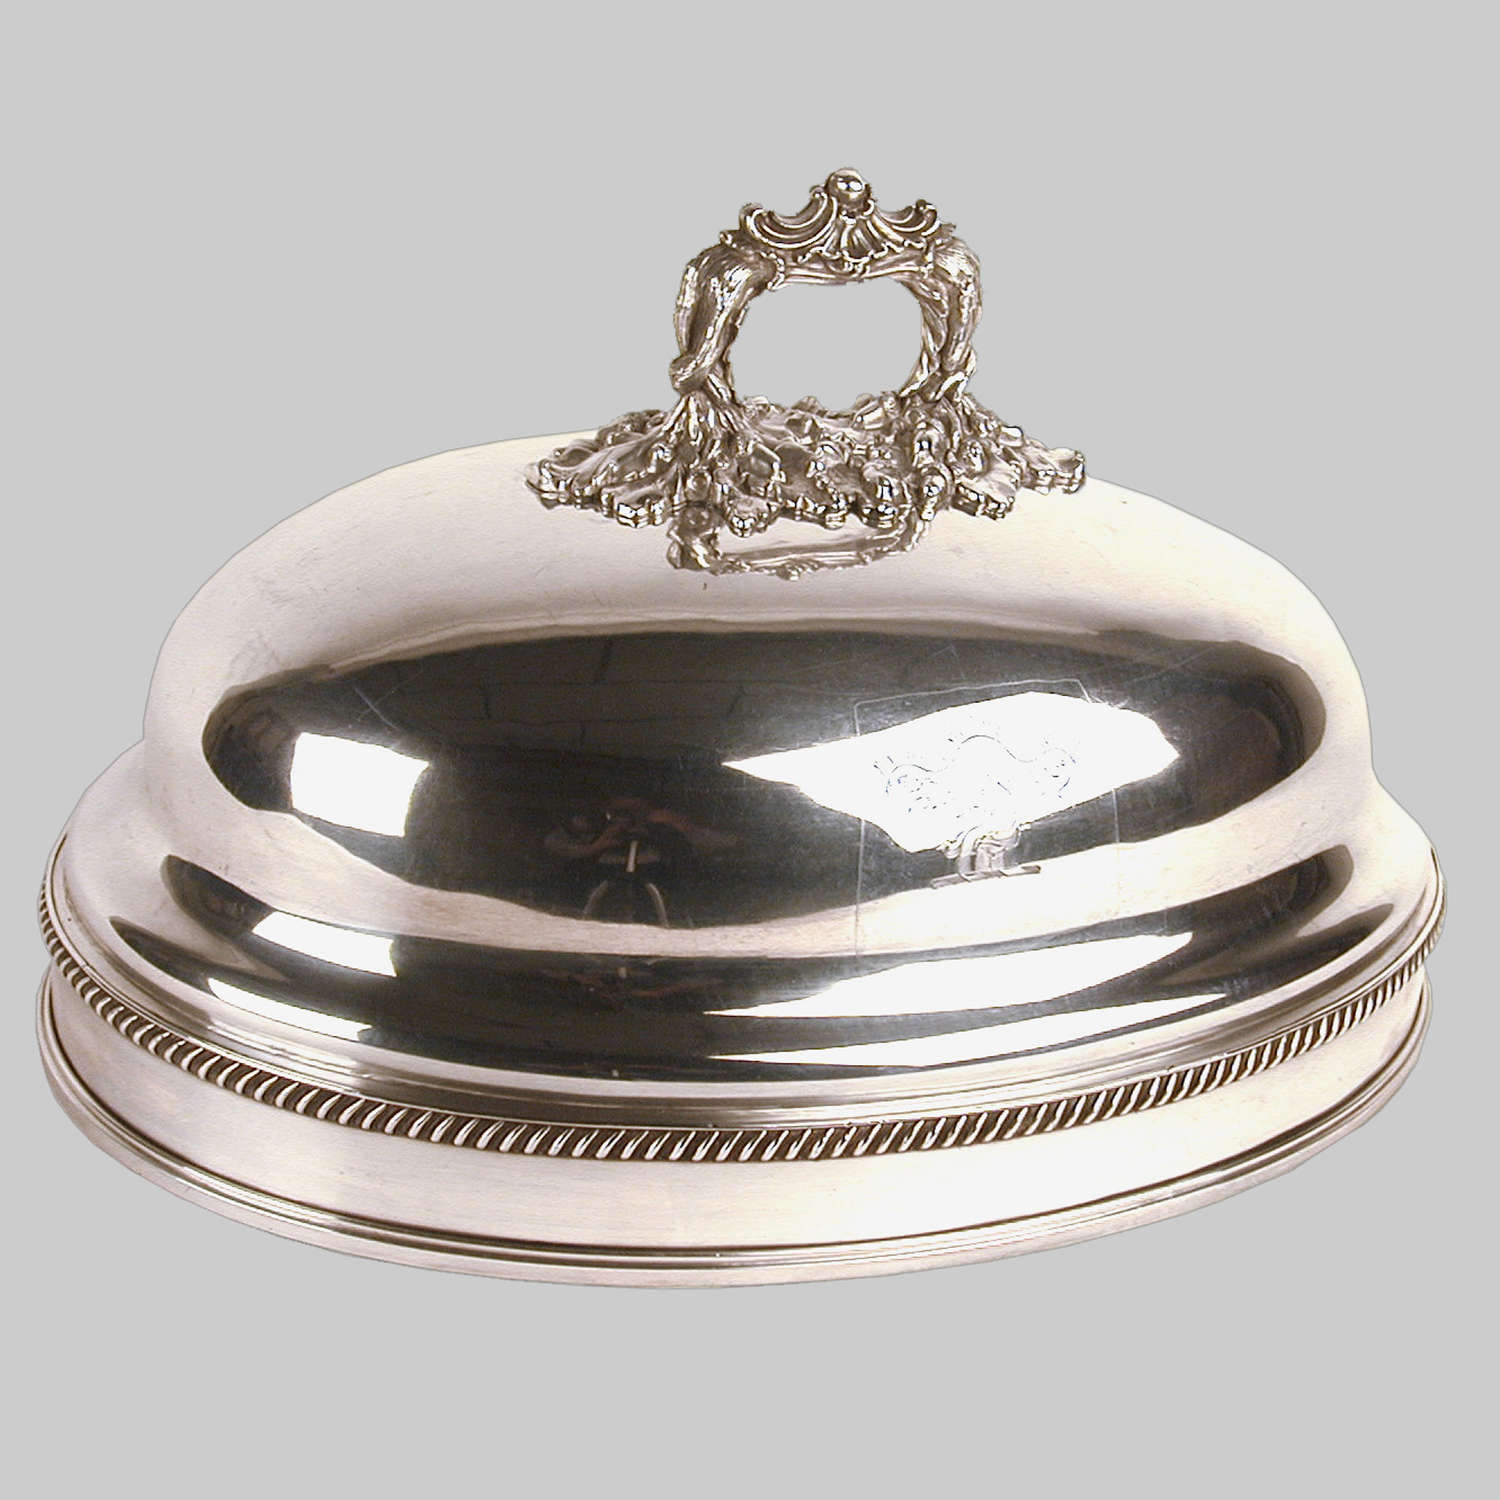 Georgian Sheffield plated charger cover